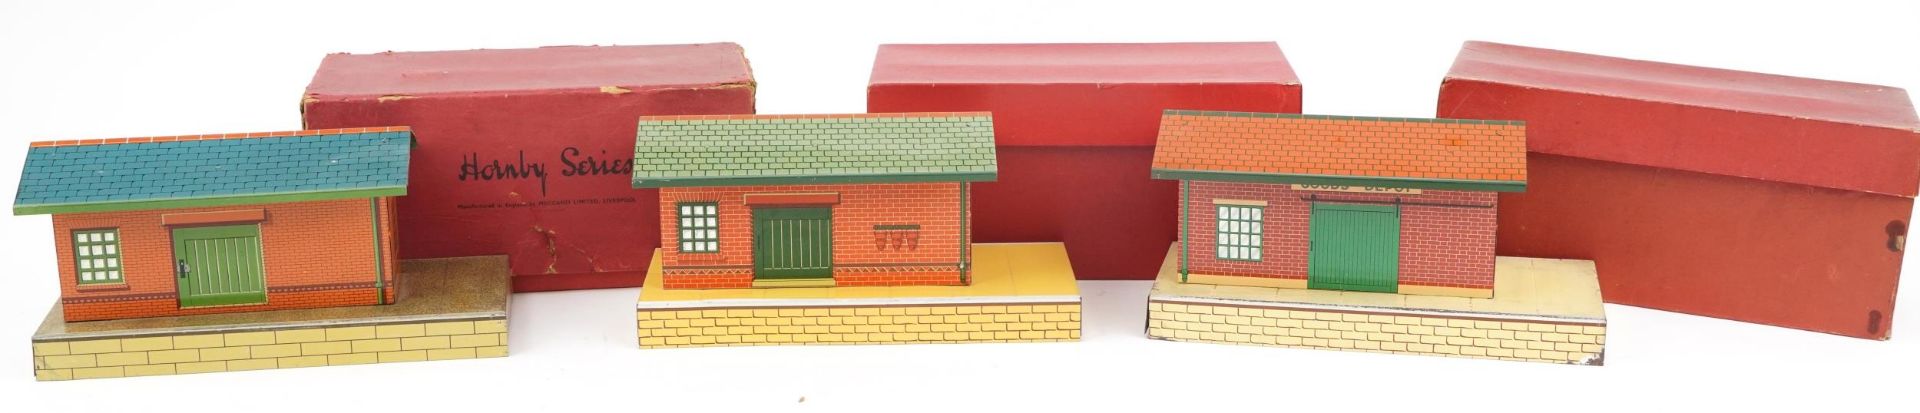 Three Hornby O gauge tinplate model railway No 1 goods platforms with boxes